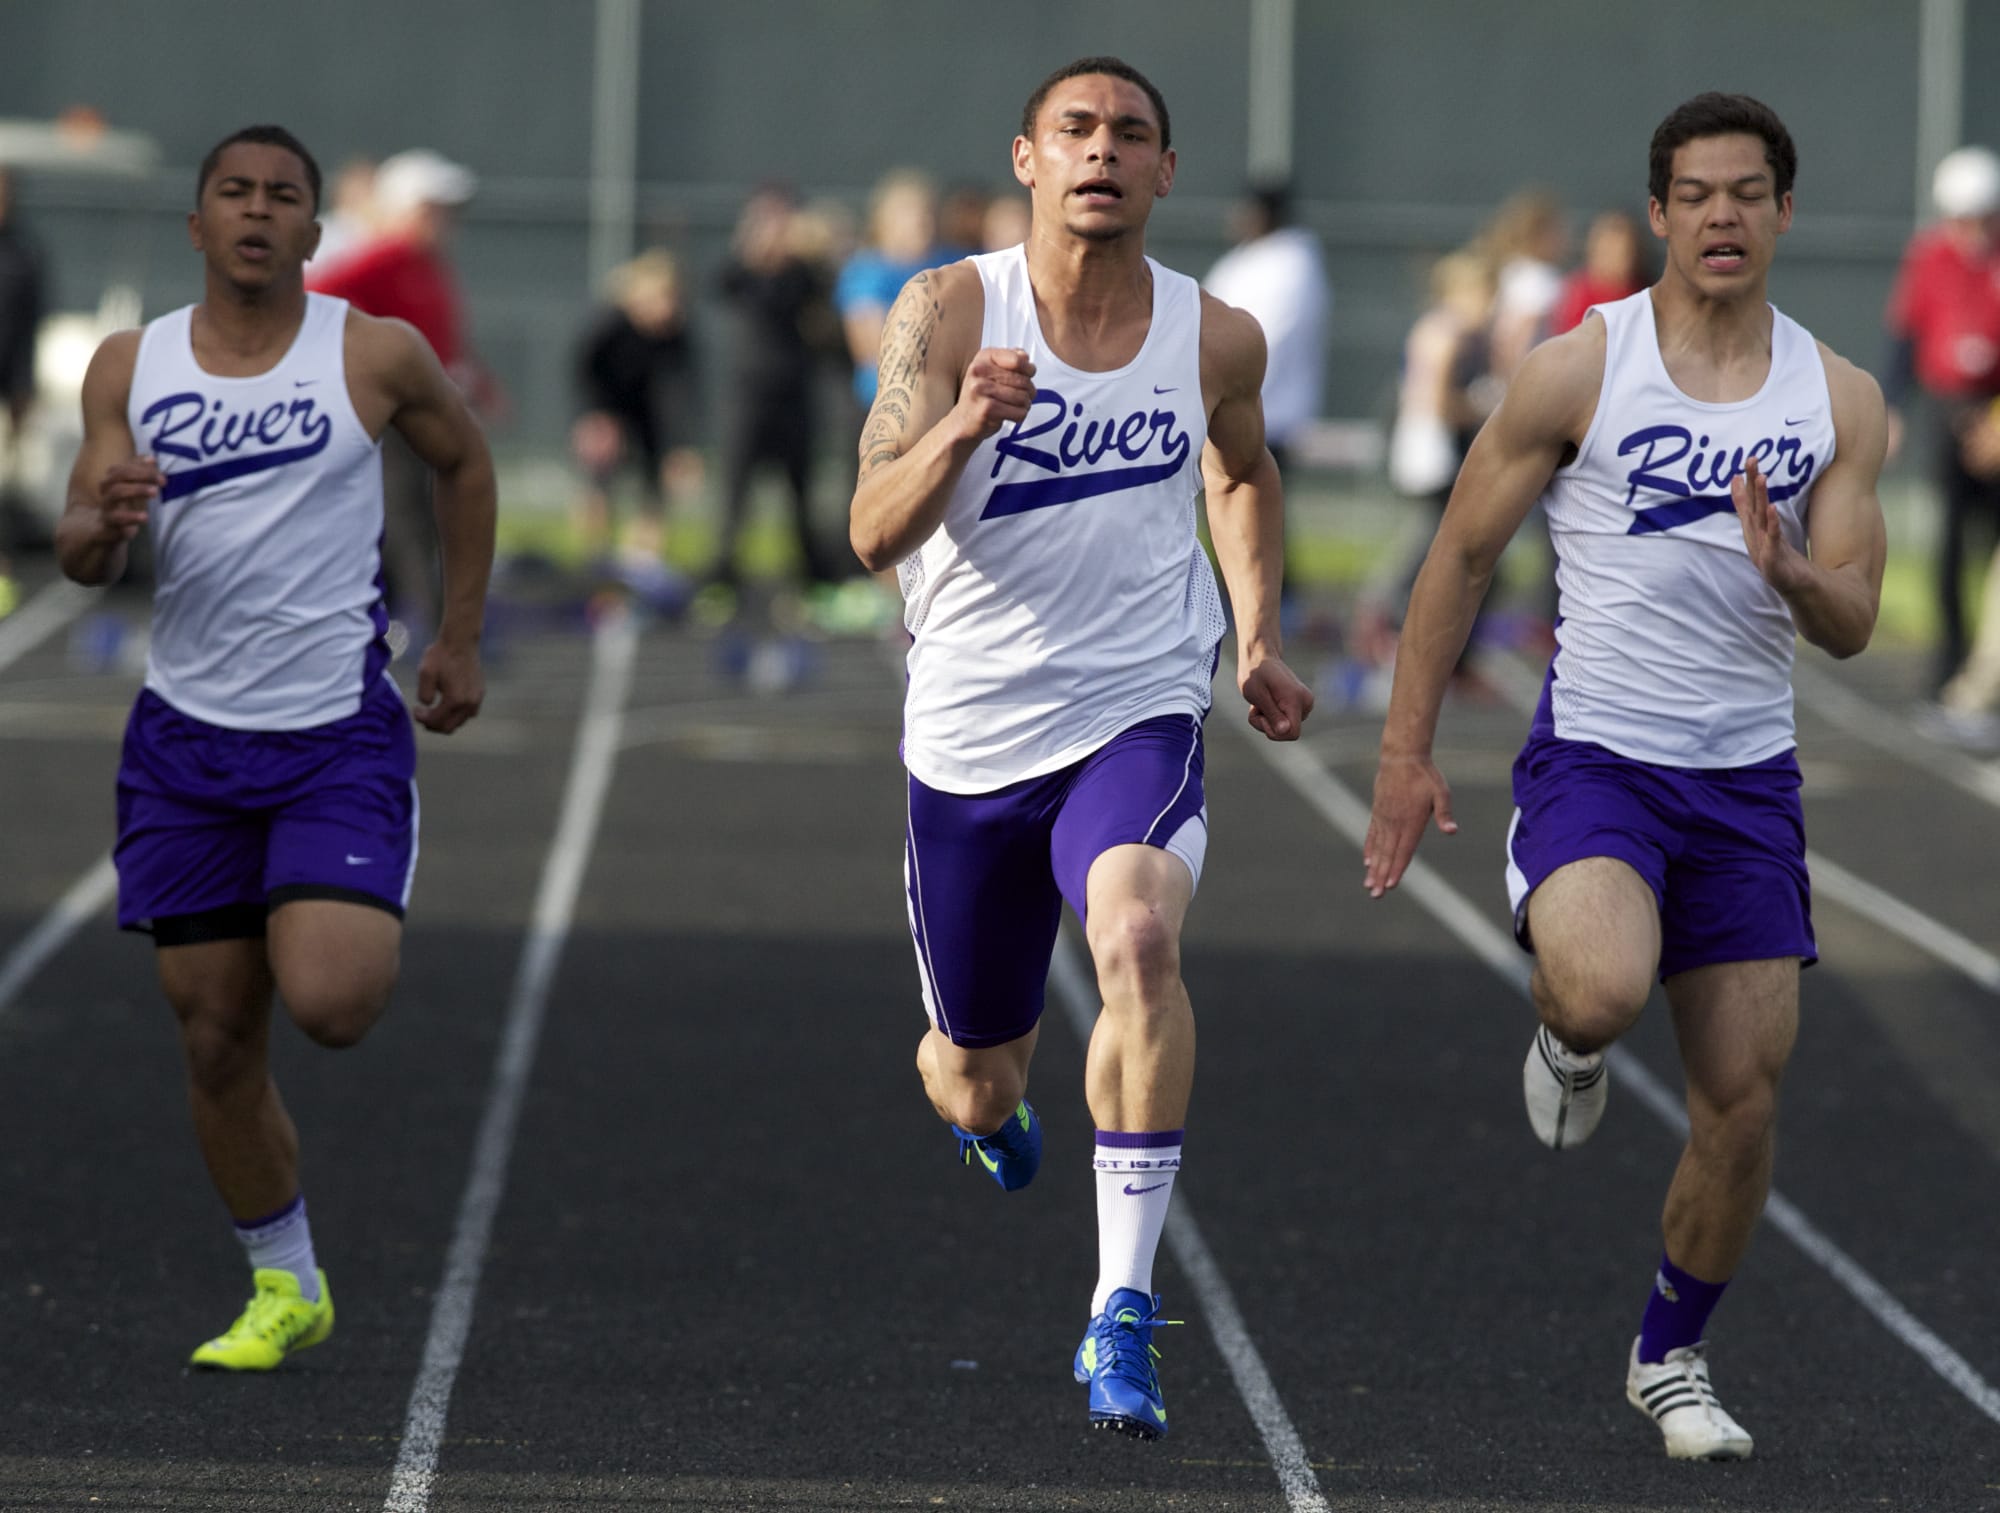 Columbia River's Marcus Gaylor, center, on his way to victory in 100 meters on Friday at the John Ingram Twilight Meet.